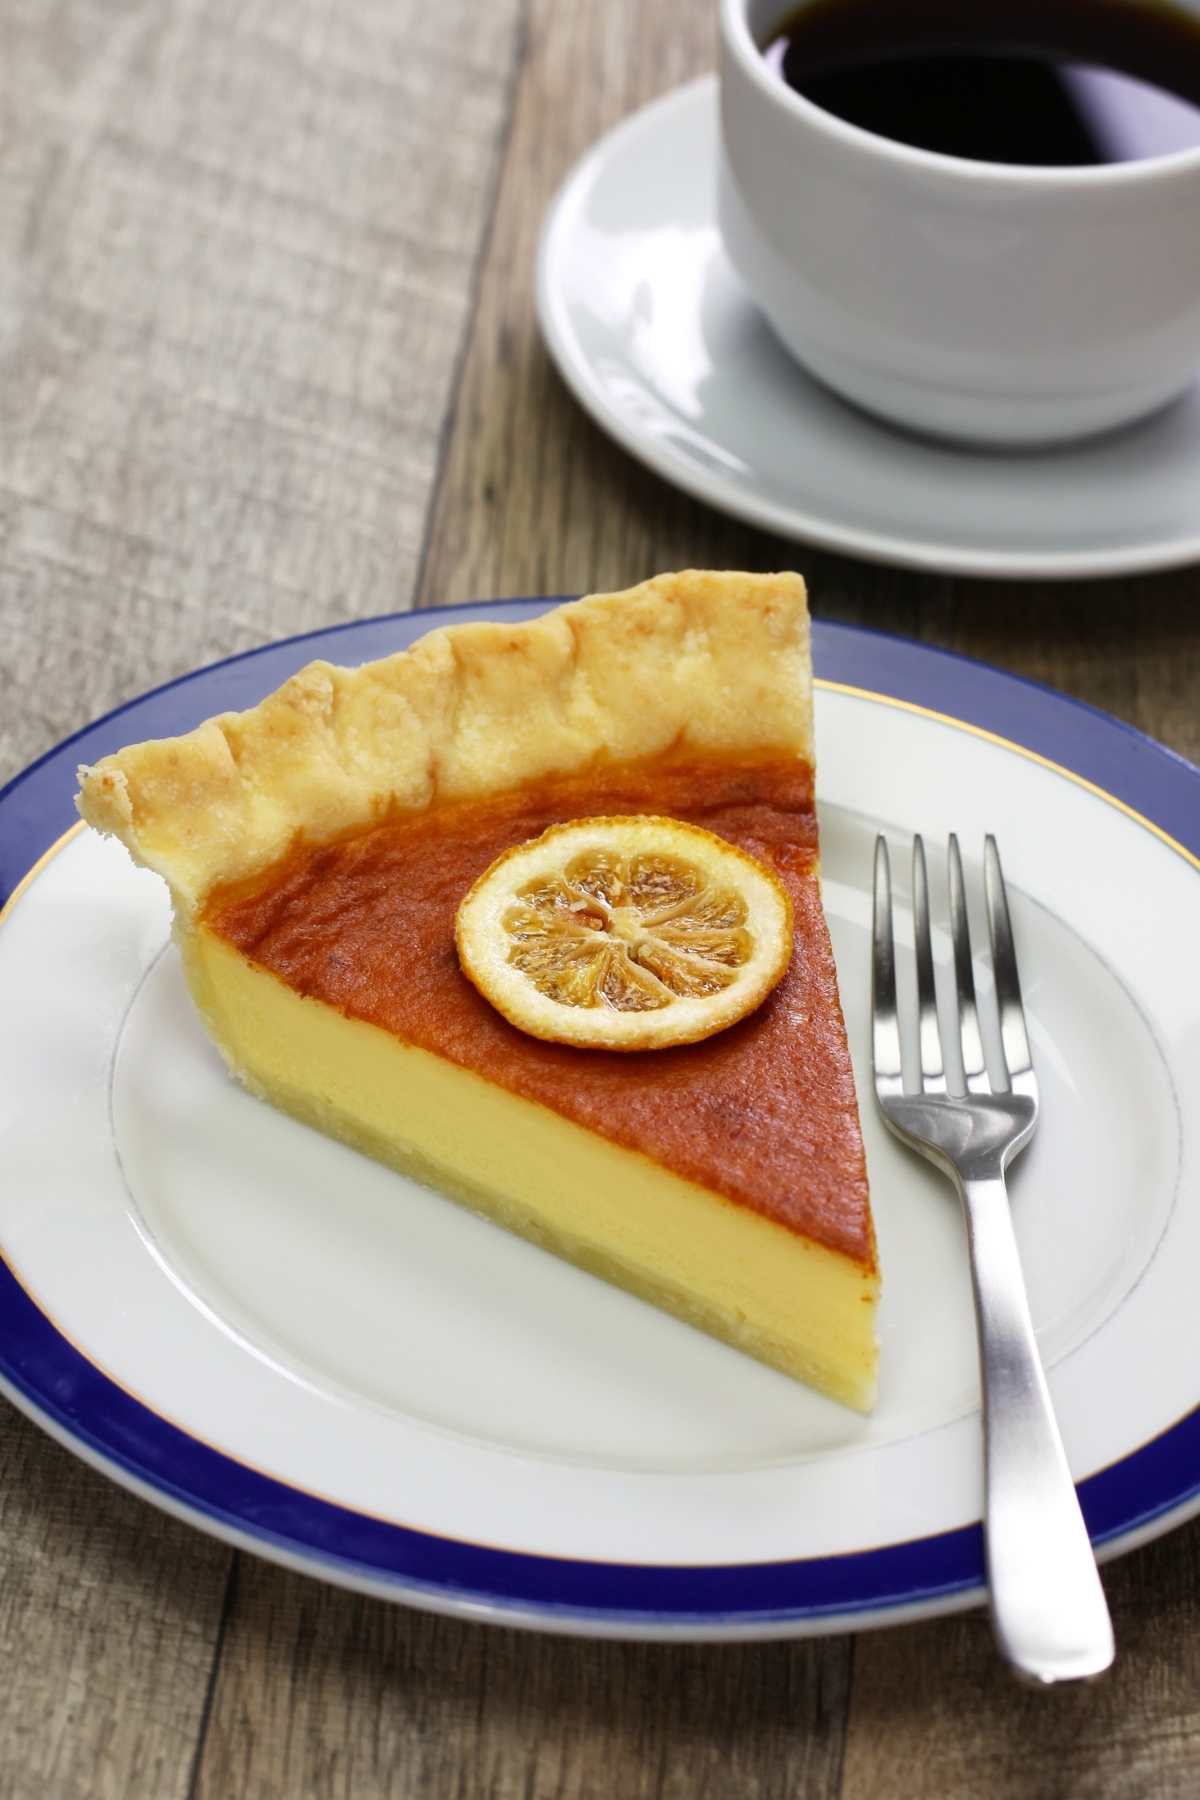 Treat your family to this classic buttermilk pie. It features the delicious flavors of vanilla, lemon, and nutmeg.